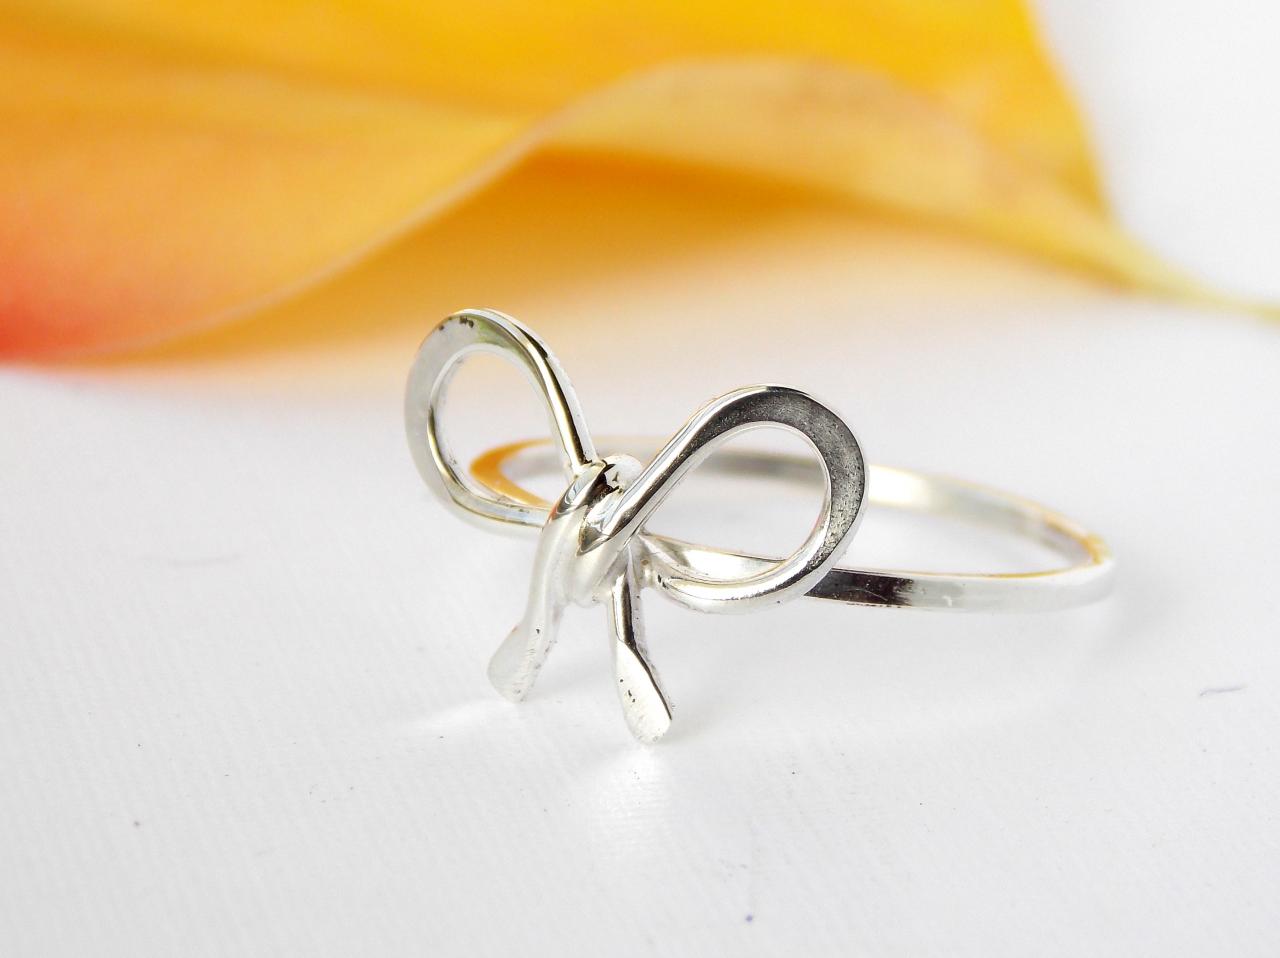 Forget Me Knot Bow Ring--sterling Silver, Friendship Ring, Silver Ring, Bow Ring, Dainty Ring, Petite Ring, Friendship Ring, Knot Ring